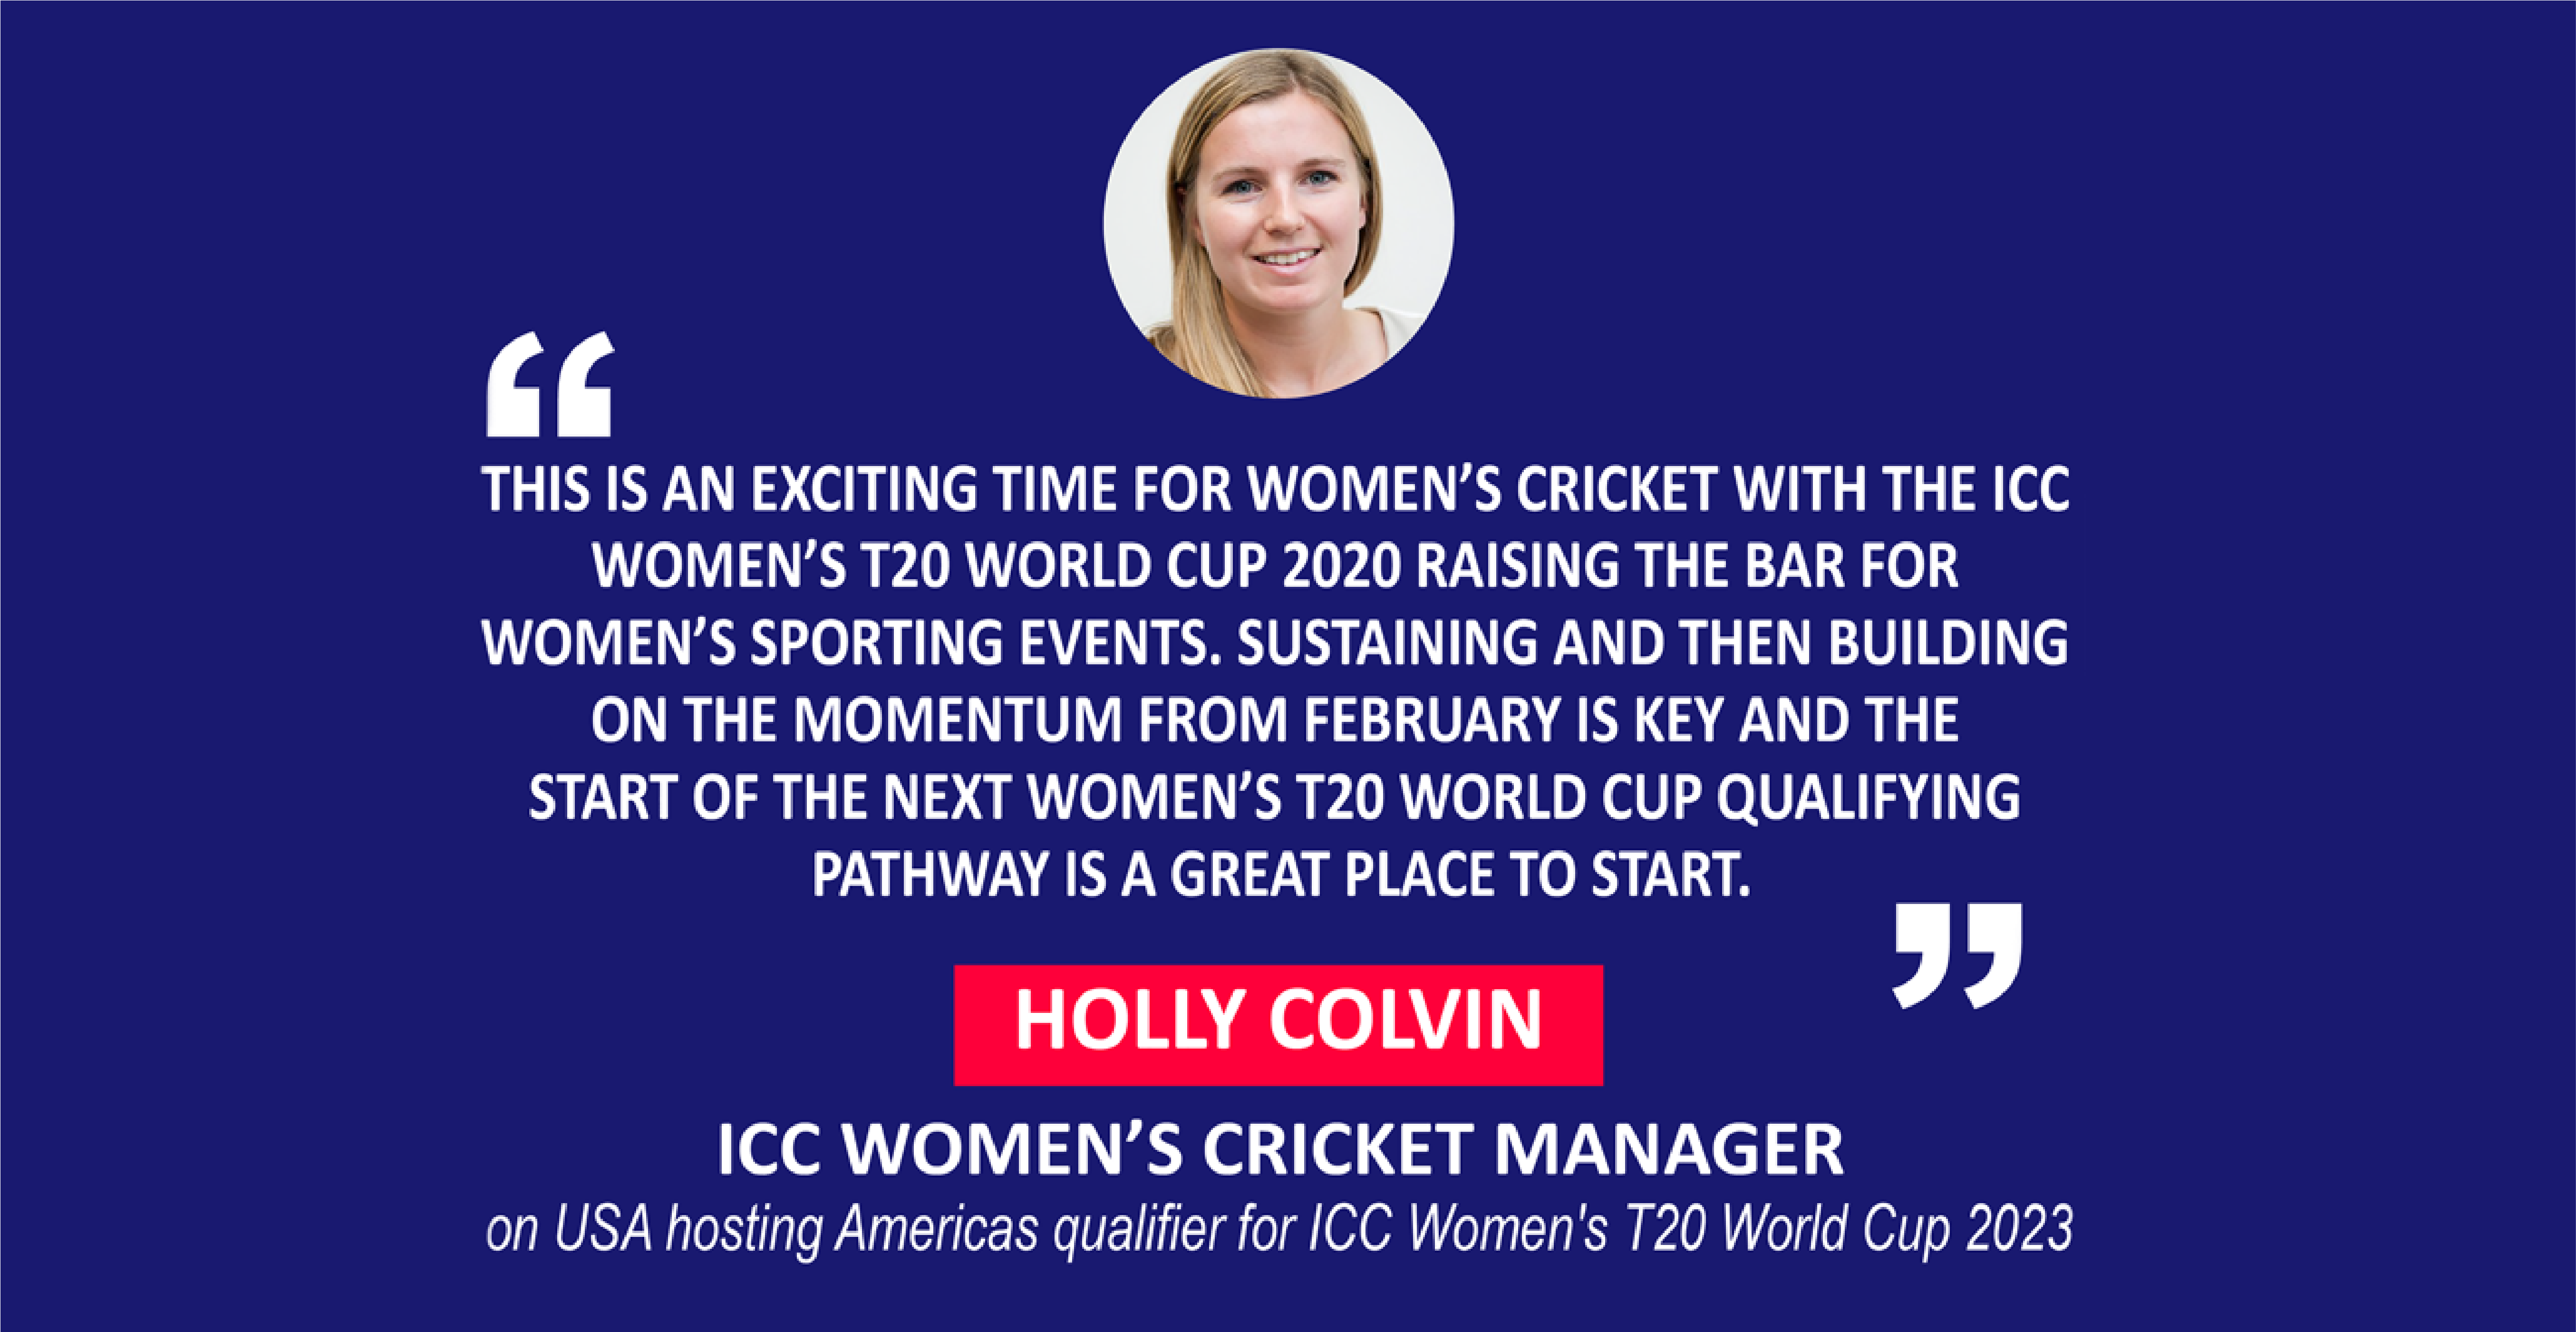 Holly Colvin, ICC Women’s Cricket Manager on USA hosting Americas qualifier for ICC Women's T20 World Cup 2023